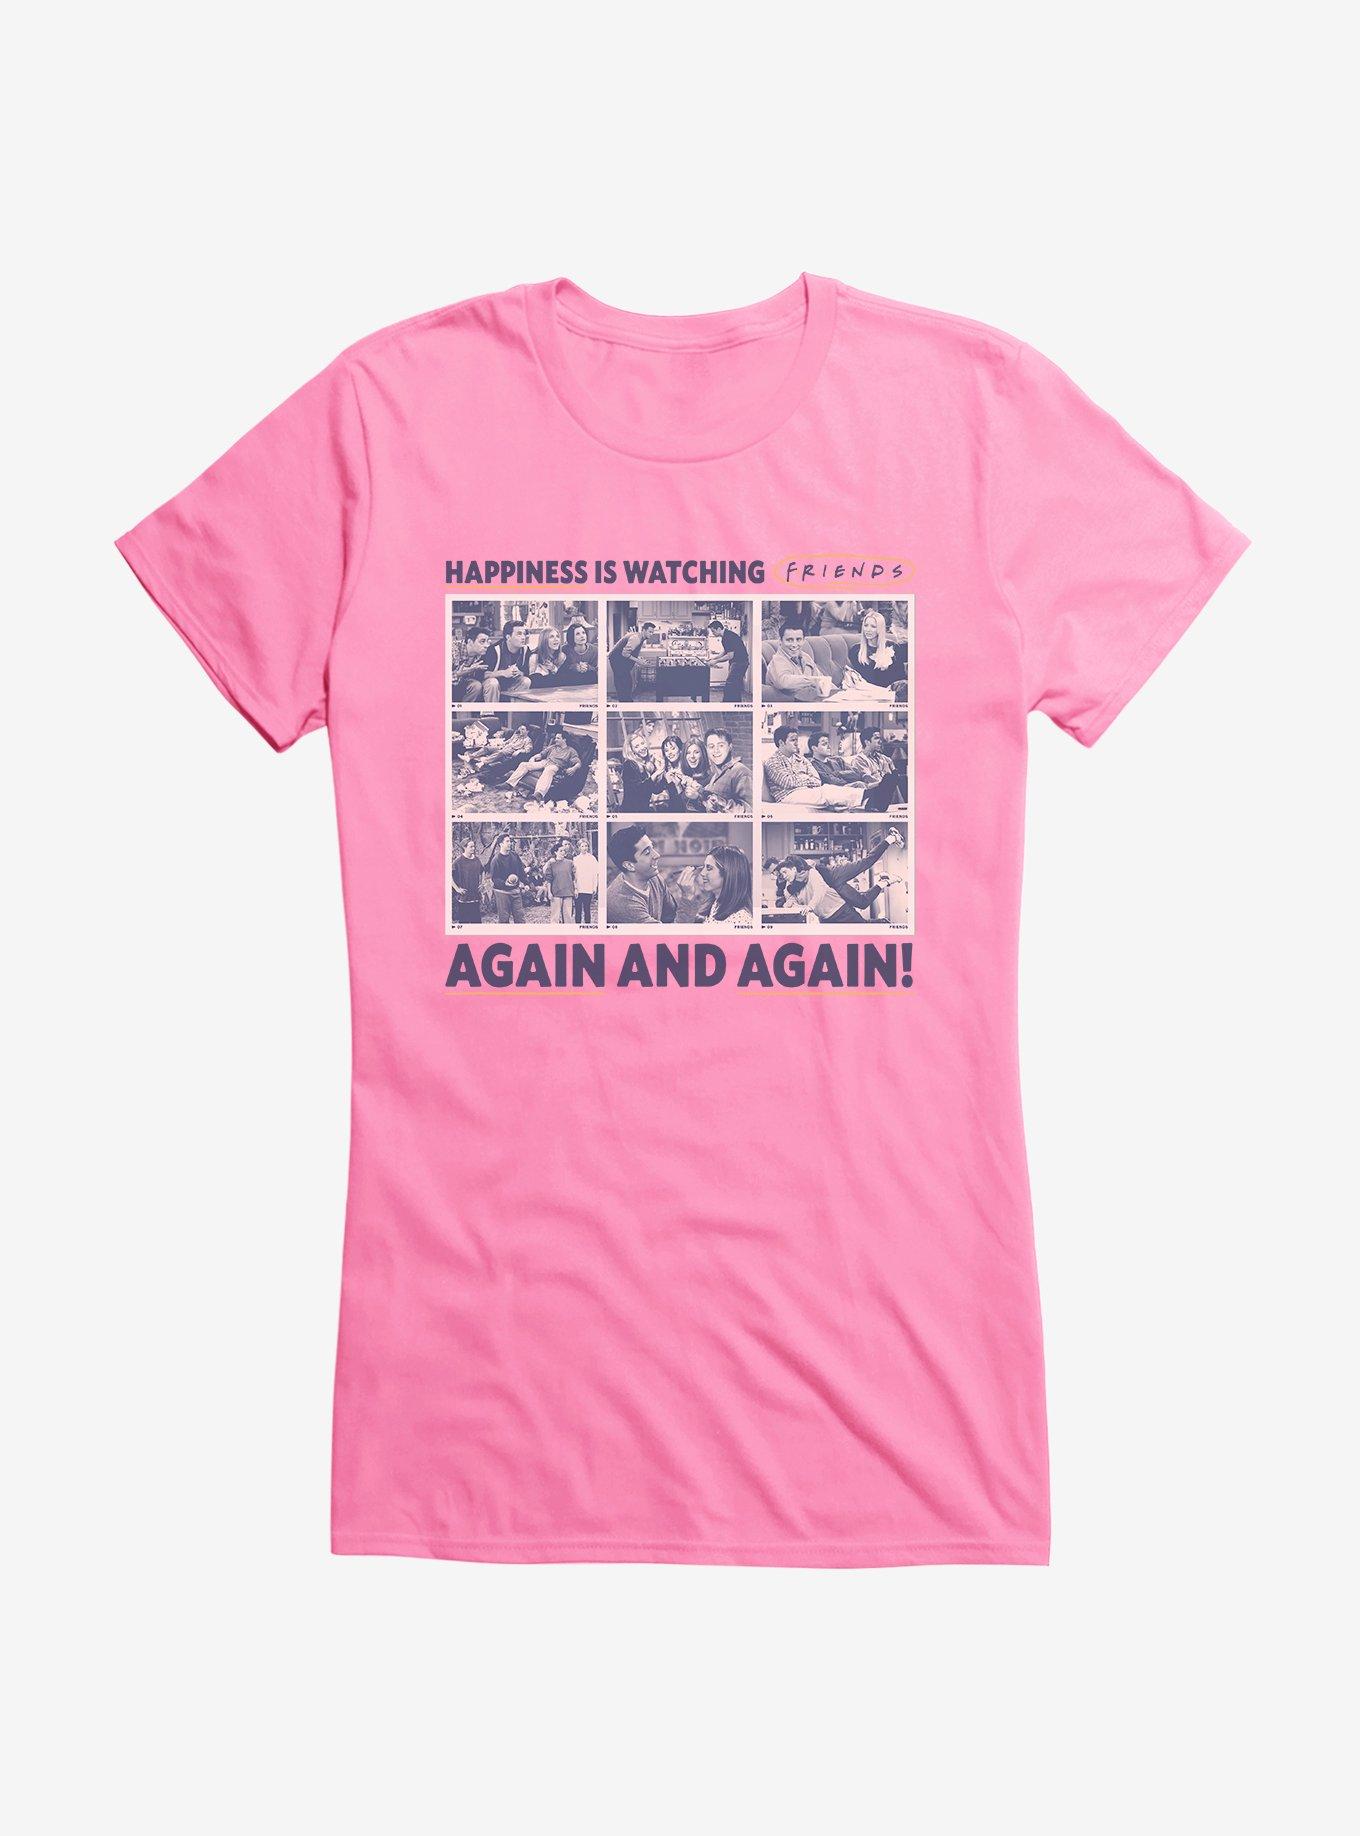 Friends Rewatching Happiness Girls T-Shirt, CHARITY PINK, hi-res